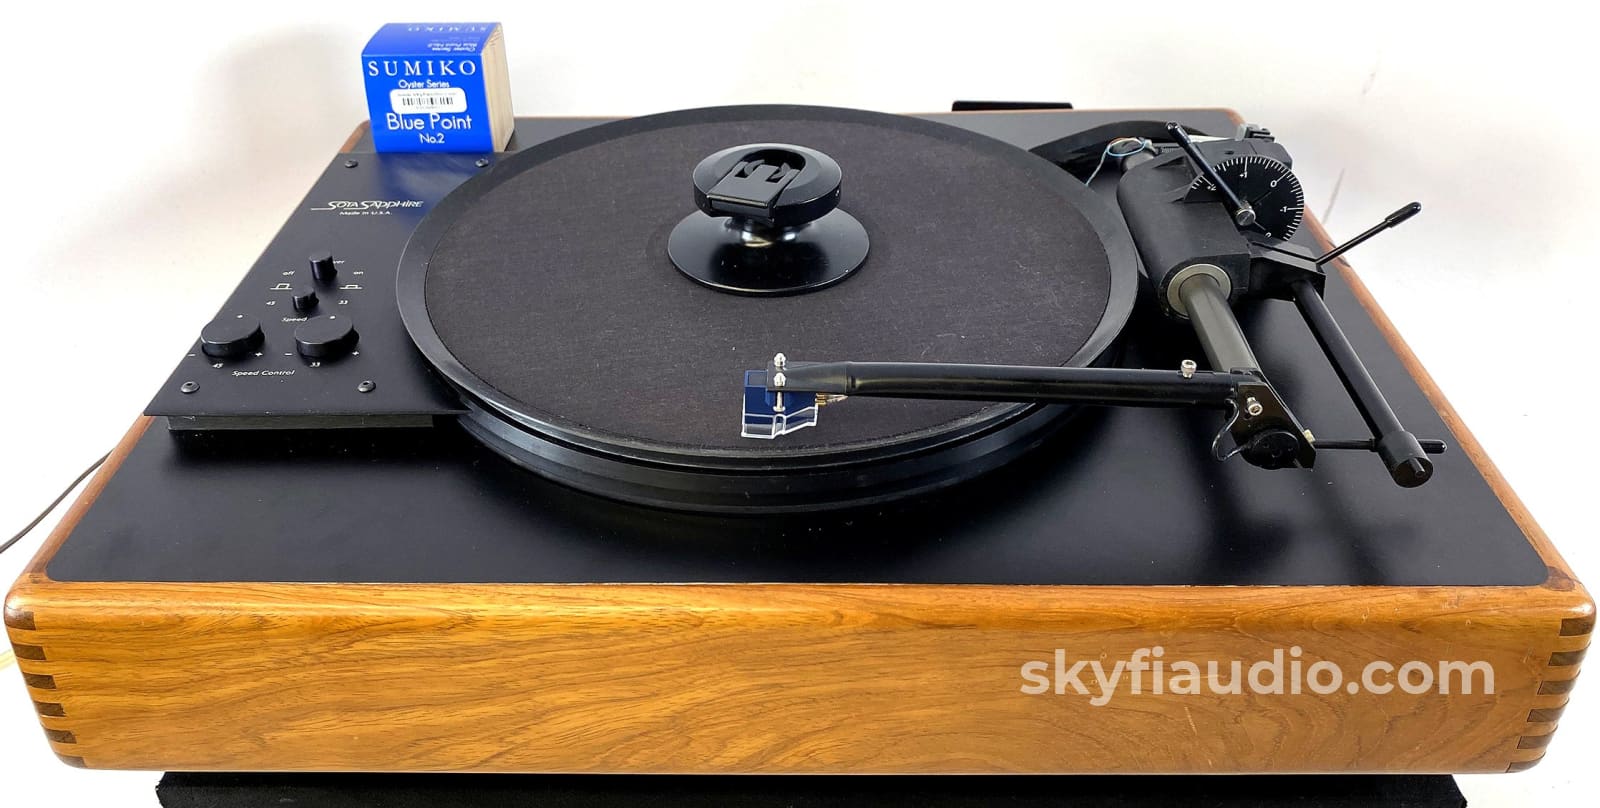 Sota Sapphire Turntable With Vacuum Platter Eminent Technology Tonearm And New Sumiko Cartridge